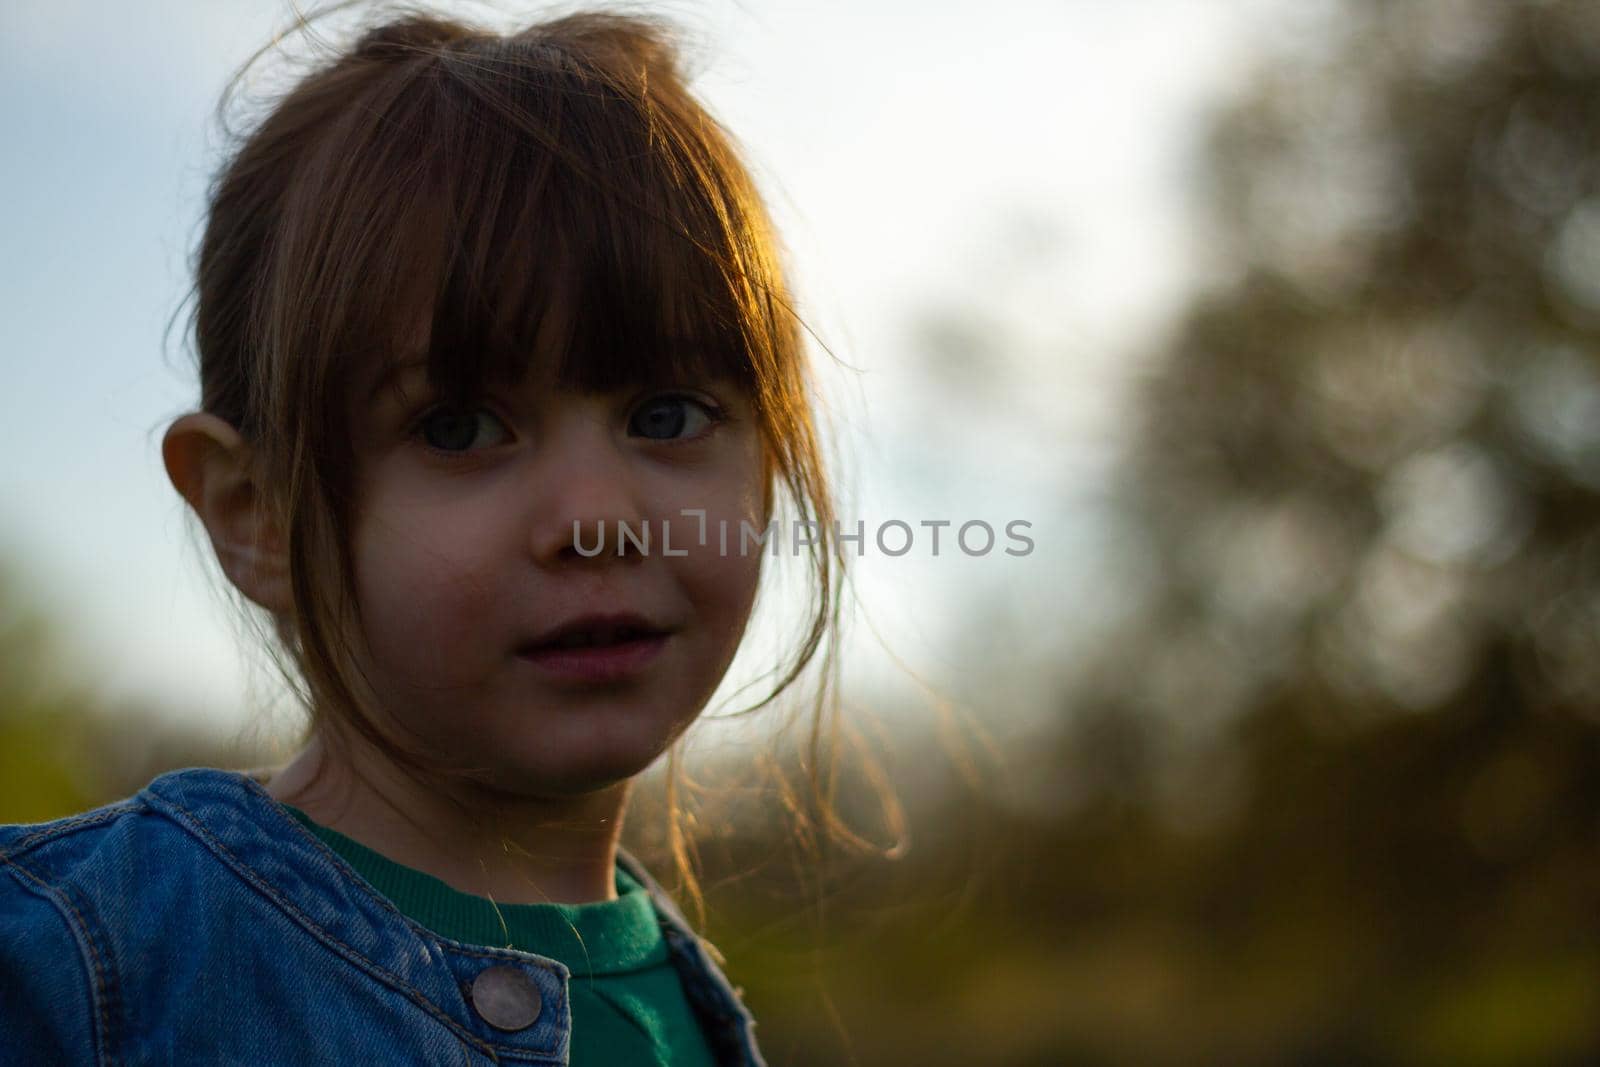 Portrait of a backlit, cute, brown-haired, blue-eyed baby girl wearing a blue jacket and green jumper standing in a park on a sunny day